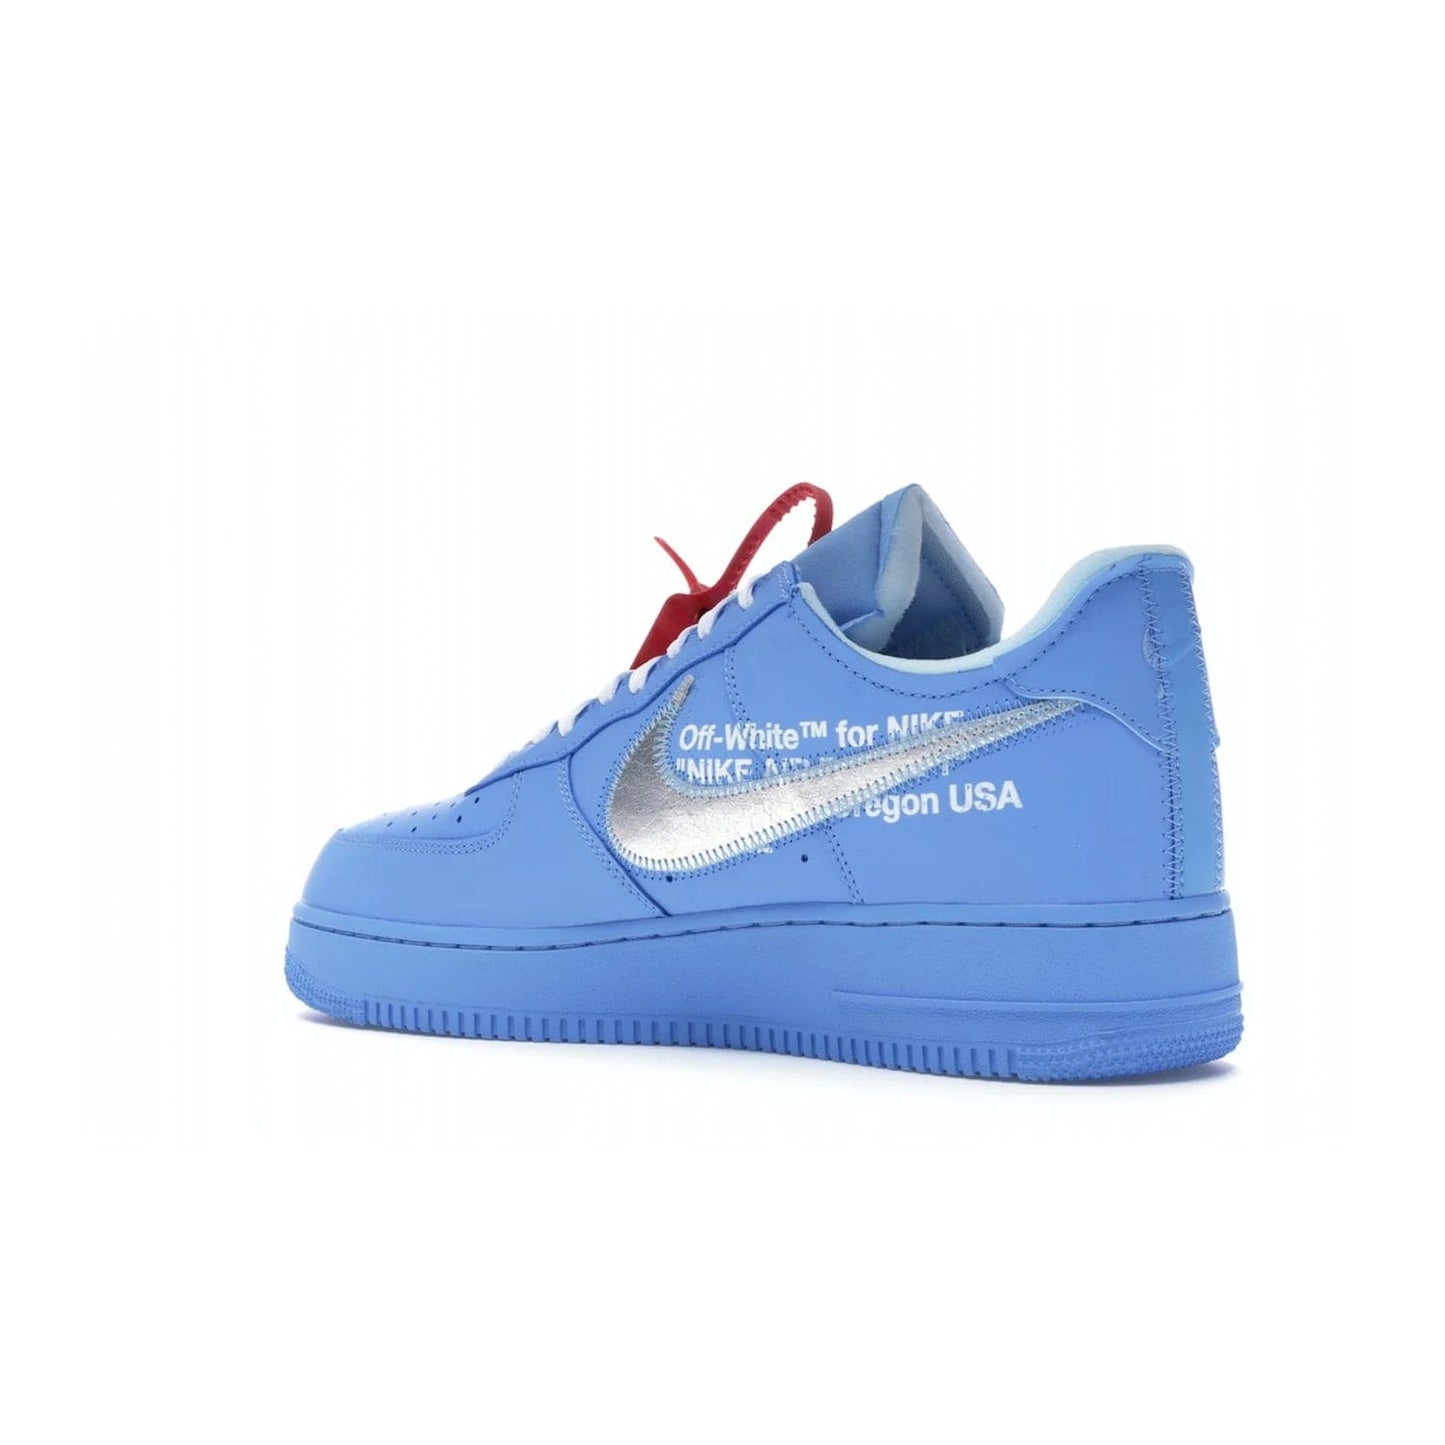 Nike Air Force 1 Low Off-White MCA University Blue - Image 23 - Only at www.BallersClubKickz.com - Virgil Abloh's Air Force 1 Low Off-White MCA University Blue: Features University Blue leather and midsole, reflective silver Nike Swoosh, red zip tie, white laces, and iconic Off-White™ branding. A must-have for any Virgil Abloh enthusiast.